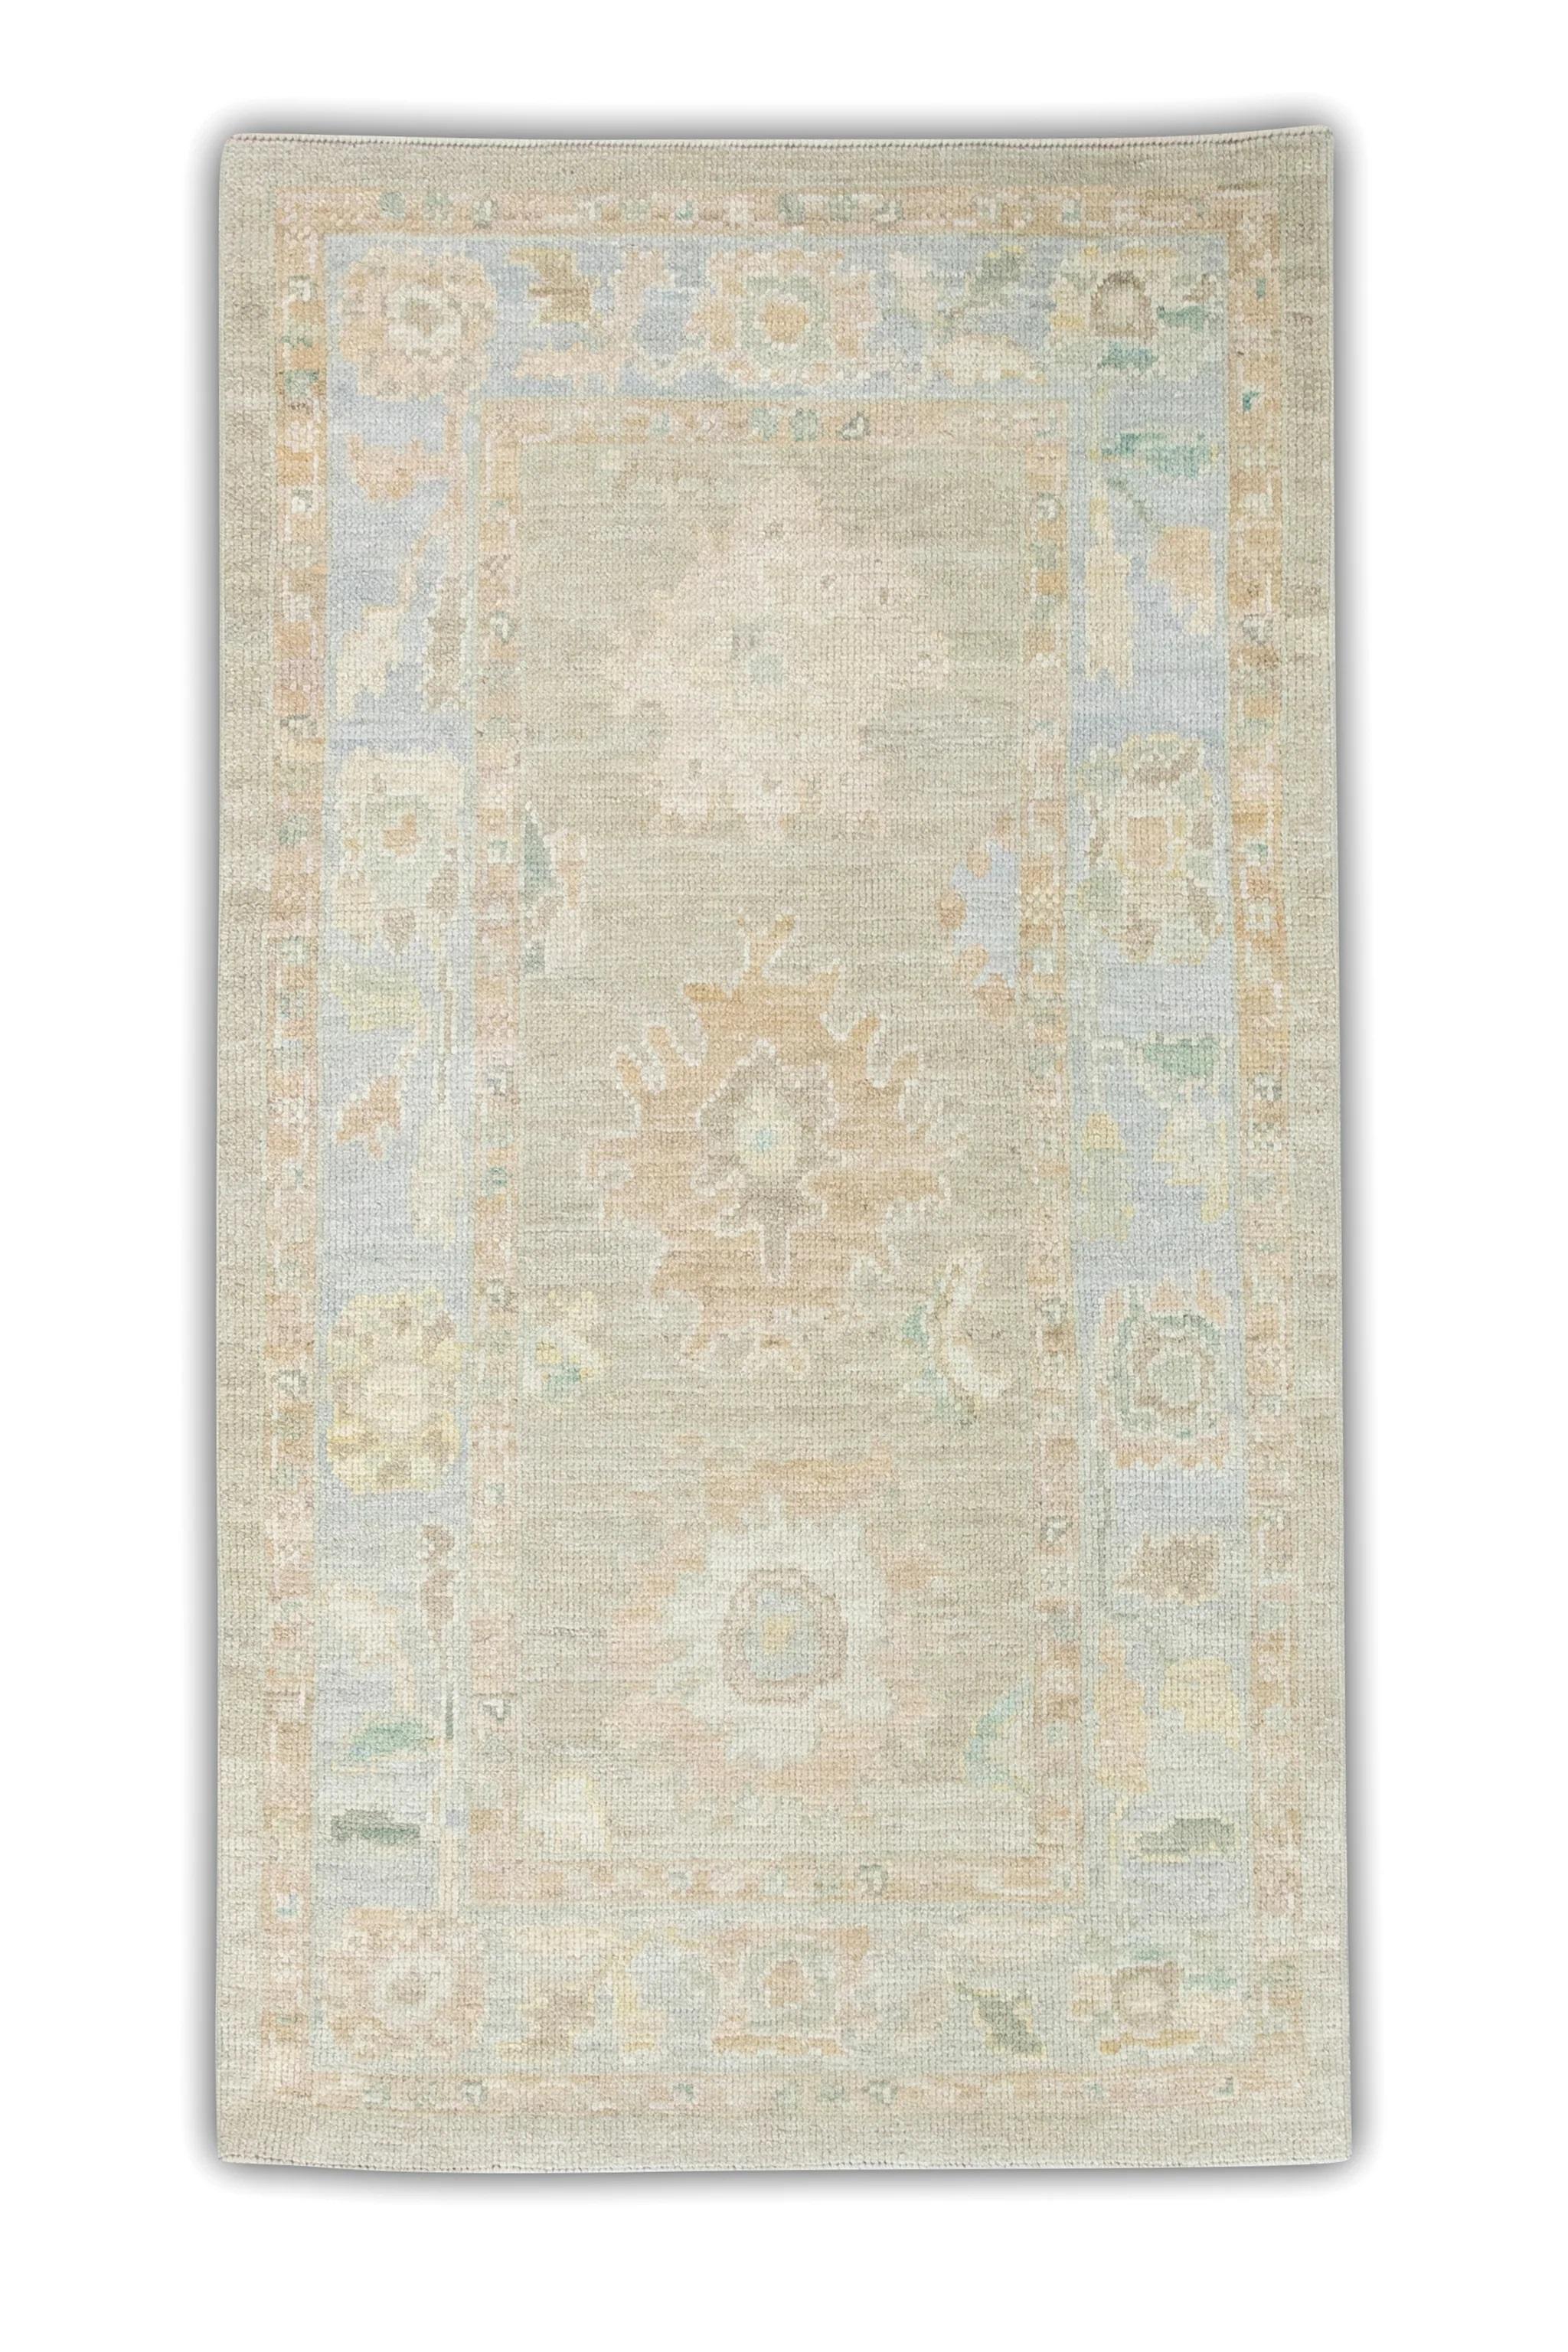 Contemporary Brown and Blue Floral Design Handwoven Wool Turkish Oushak Rug 3' x 5'5